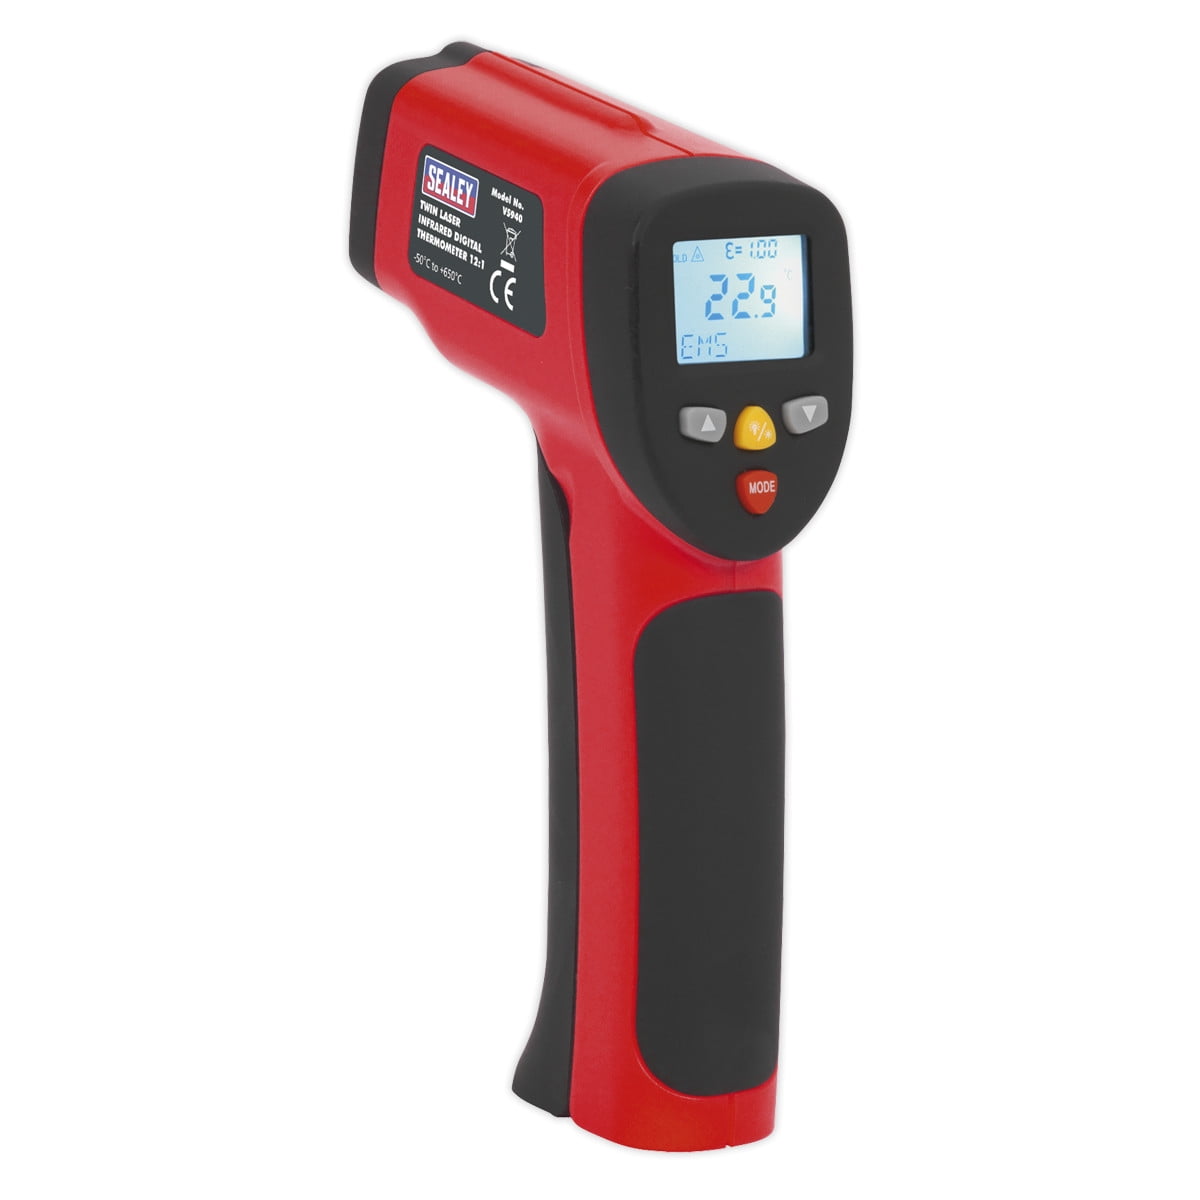 12:1 Wide-Range Infrared Thermometer with Star Burst Laser Targeting